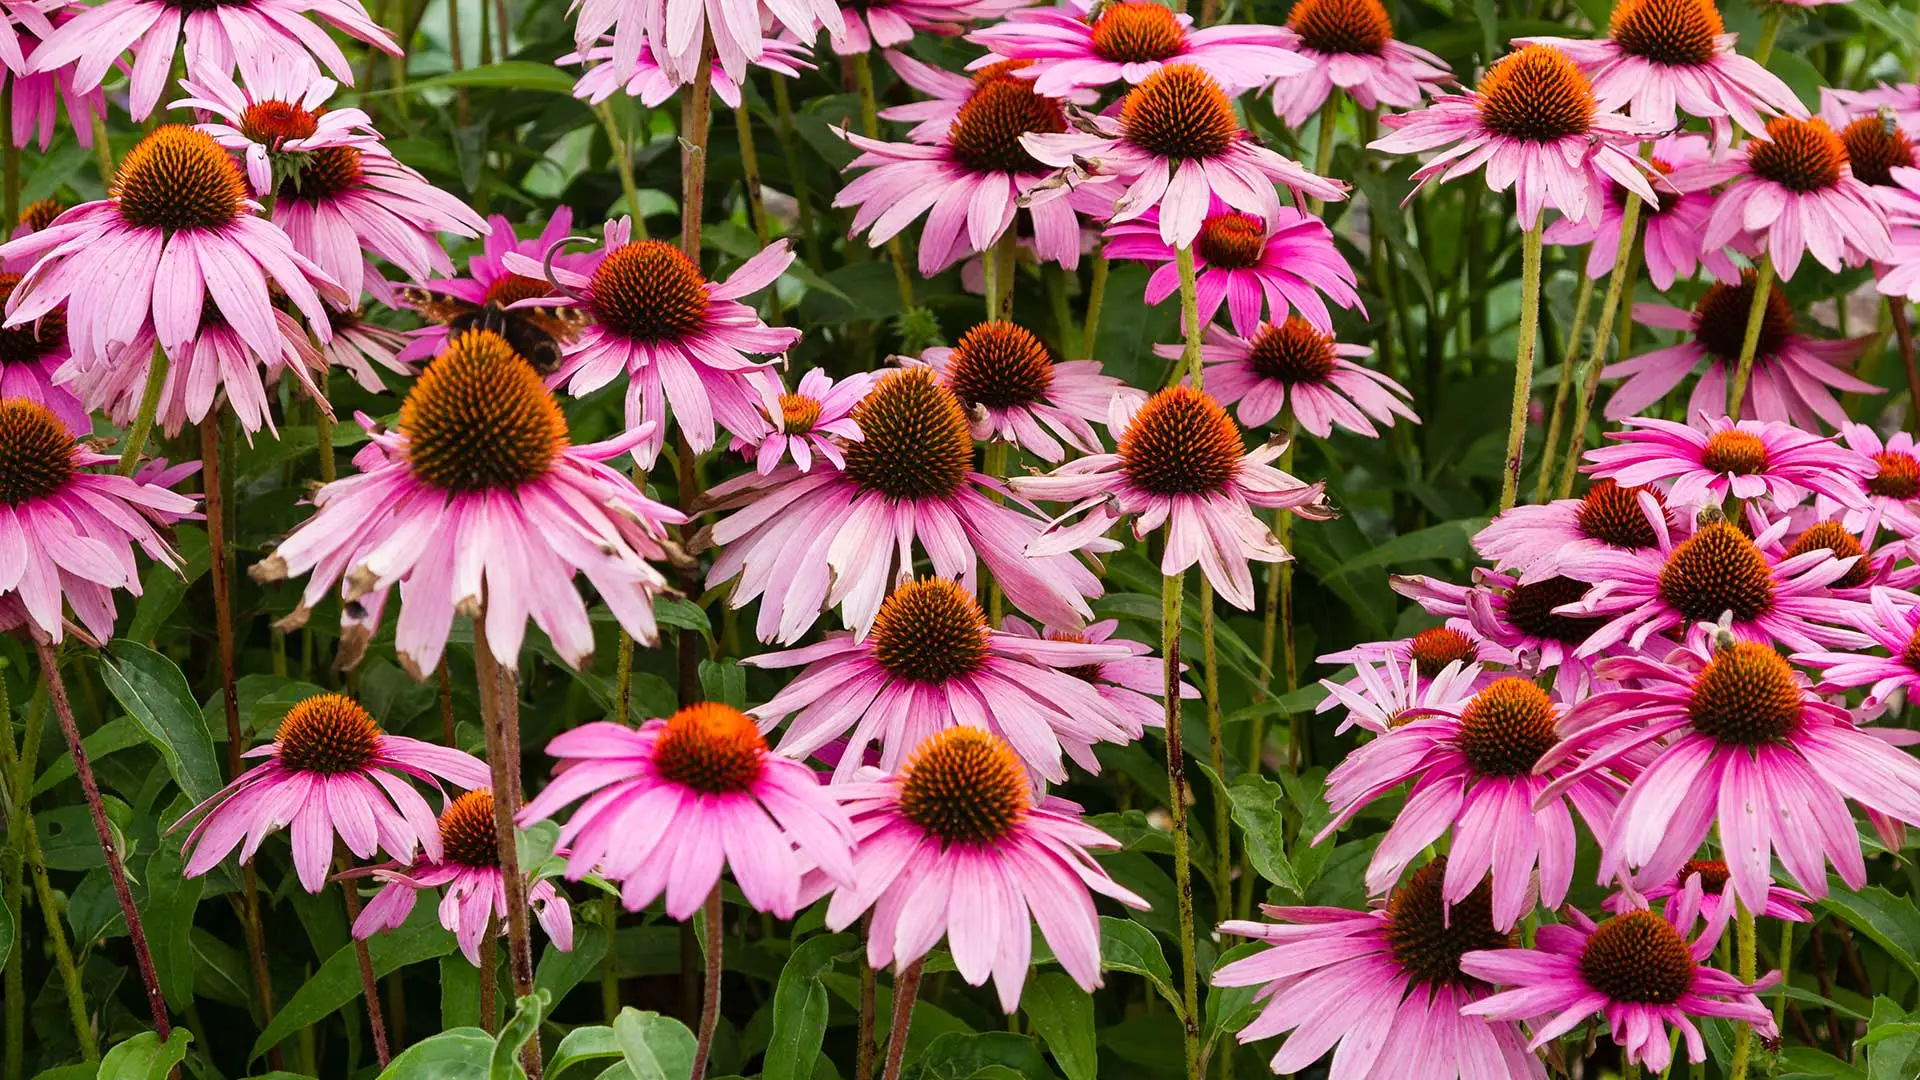 5 Amazing Summer Blooms You'll Find in Michigan